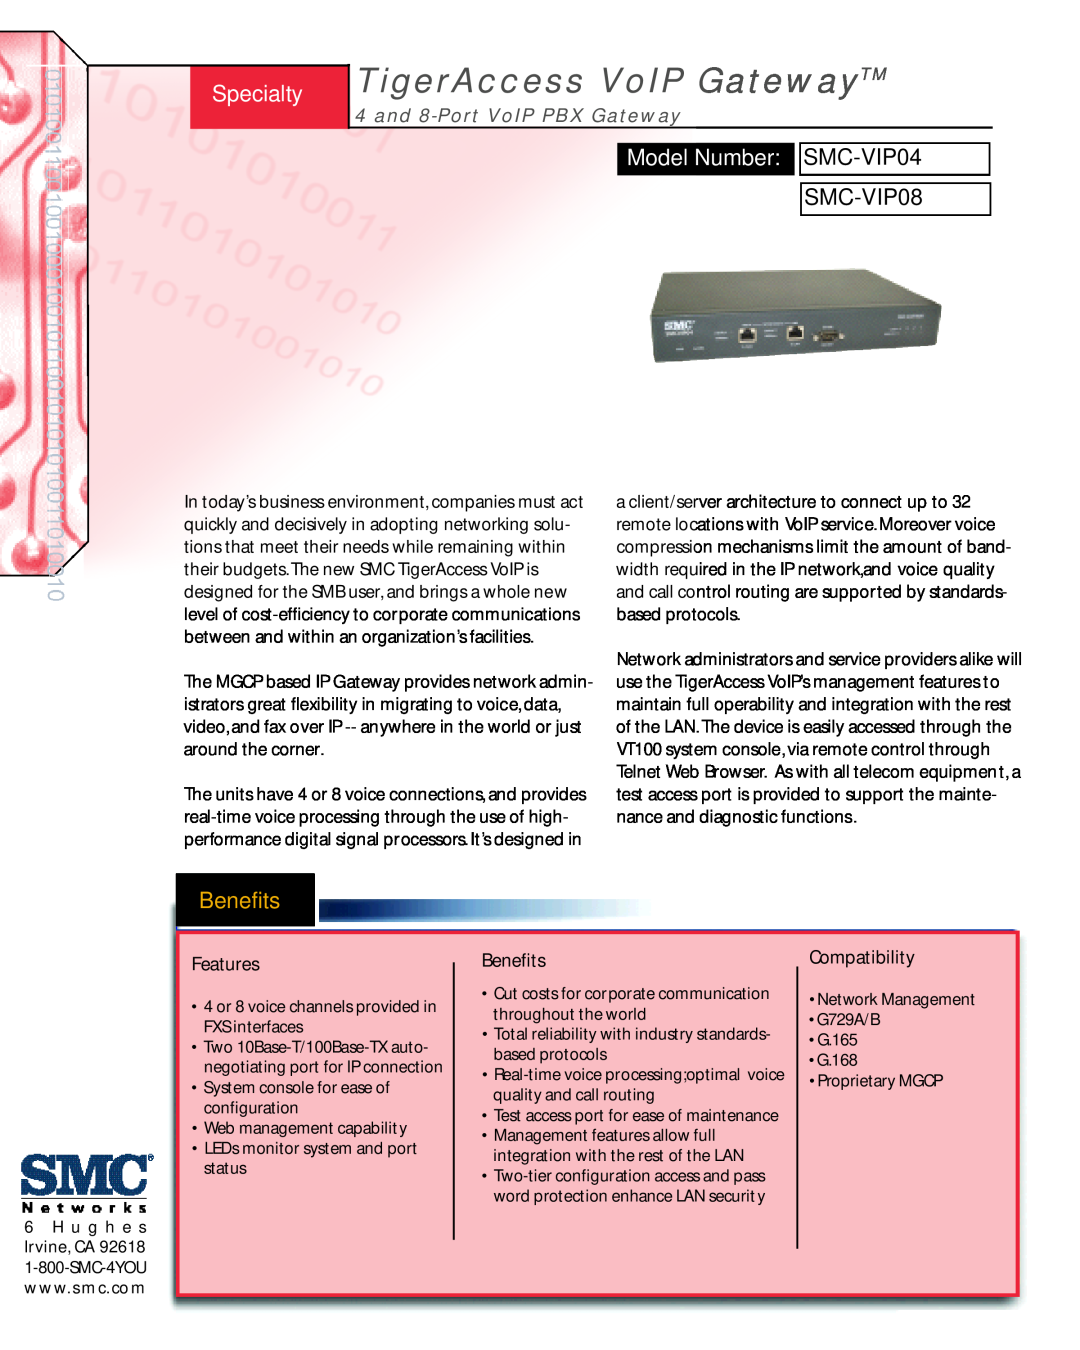 SMC Networks manual Specialty TigerAccess VoIP GatewayTM, Model Number SMC-VIP04, and 8-Port VoIP PBX Gateway, Benefits 